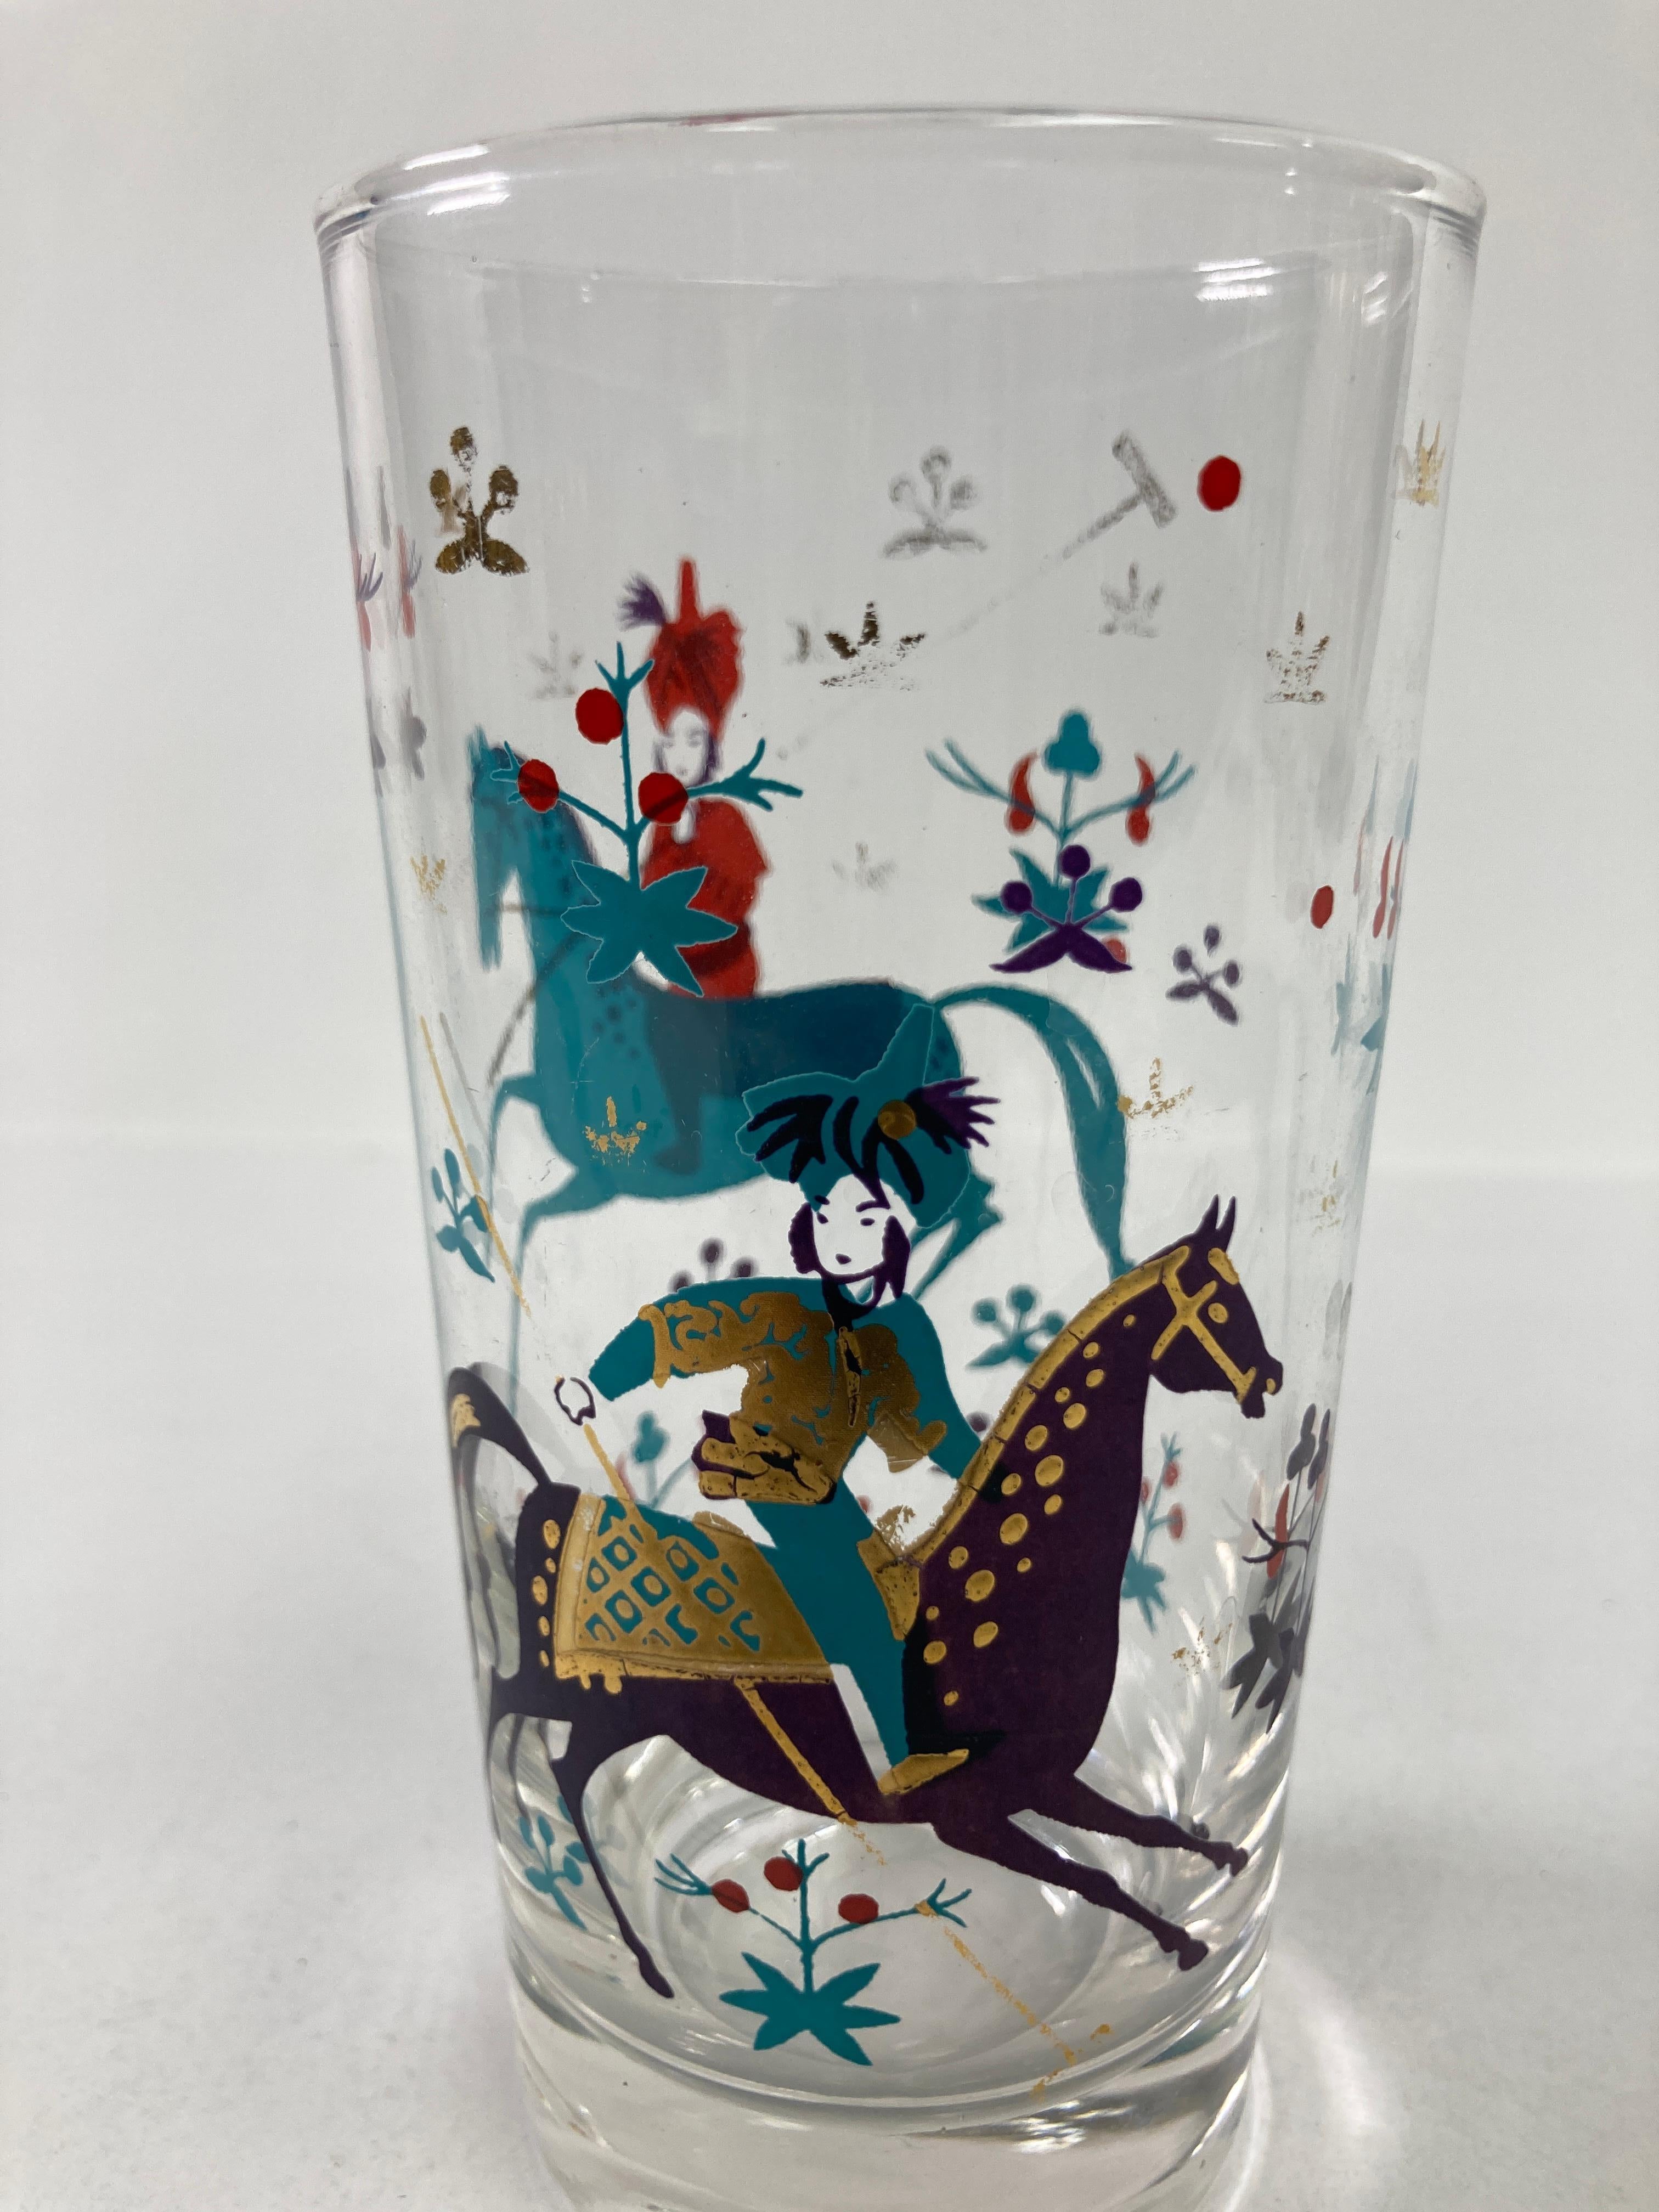 American Arabian Nights Highball Tumbler Turquoise and Gold by Georges Briard 1950's For Sale